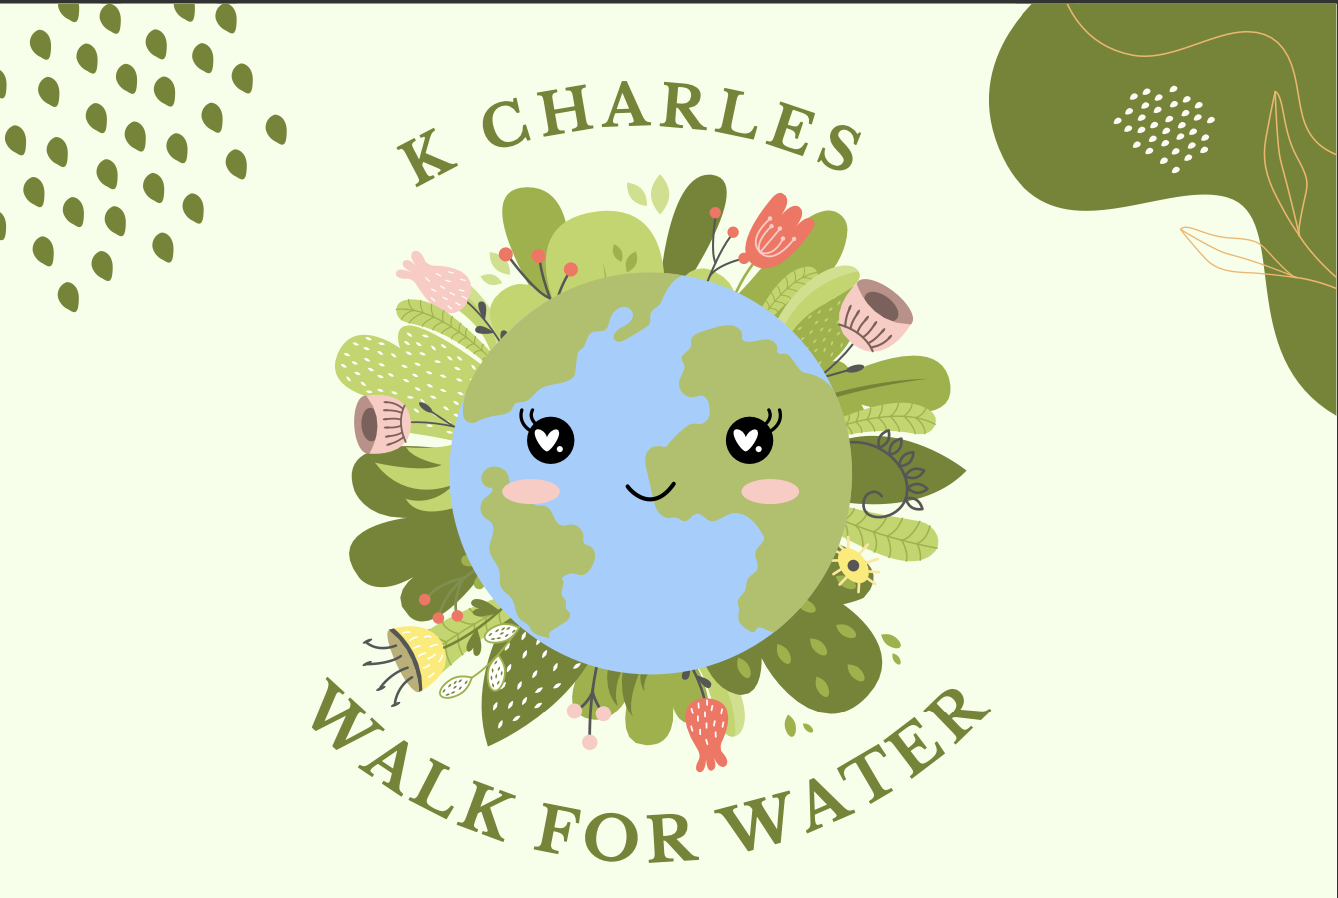 Illustration of a smiling earth surrounded by plants and flowers, with text "k charles walk for water" on a light green background. - K. Charles & Co. in San Antonio and Schertz, TX